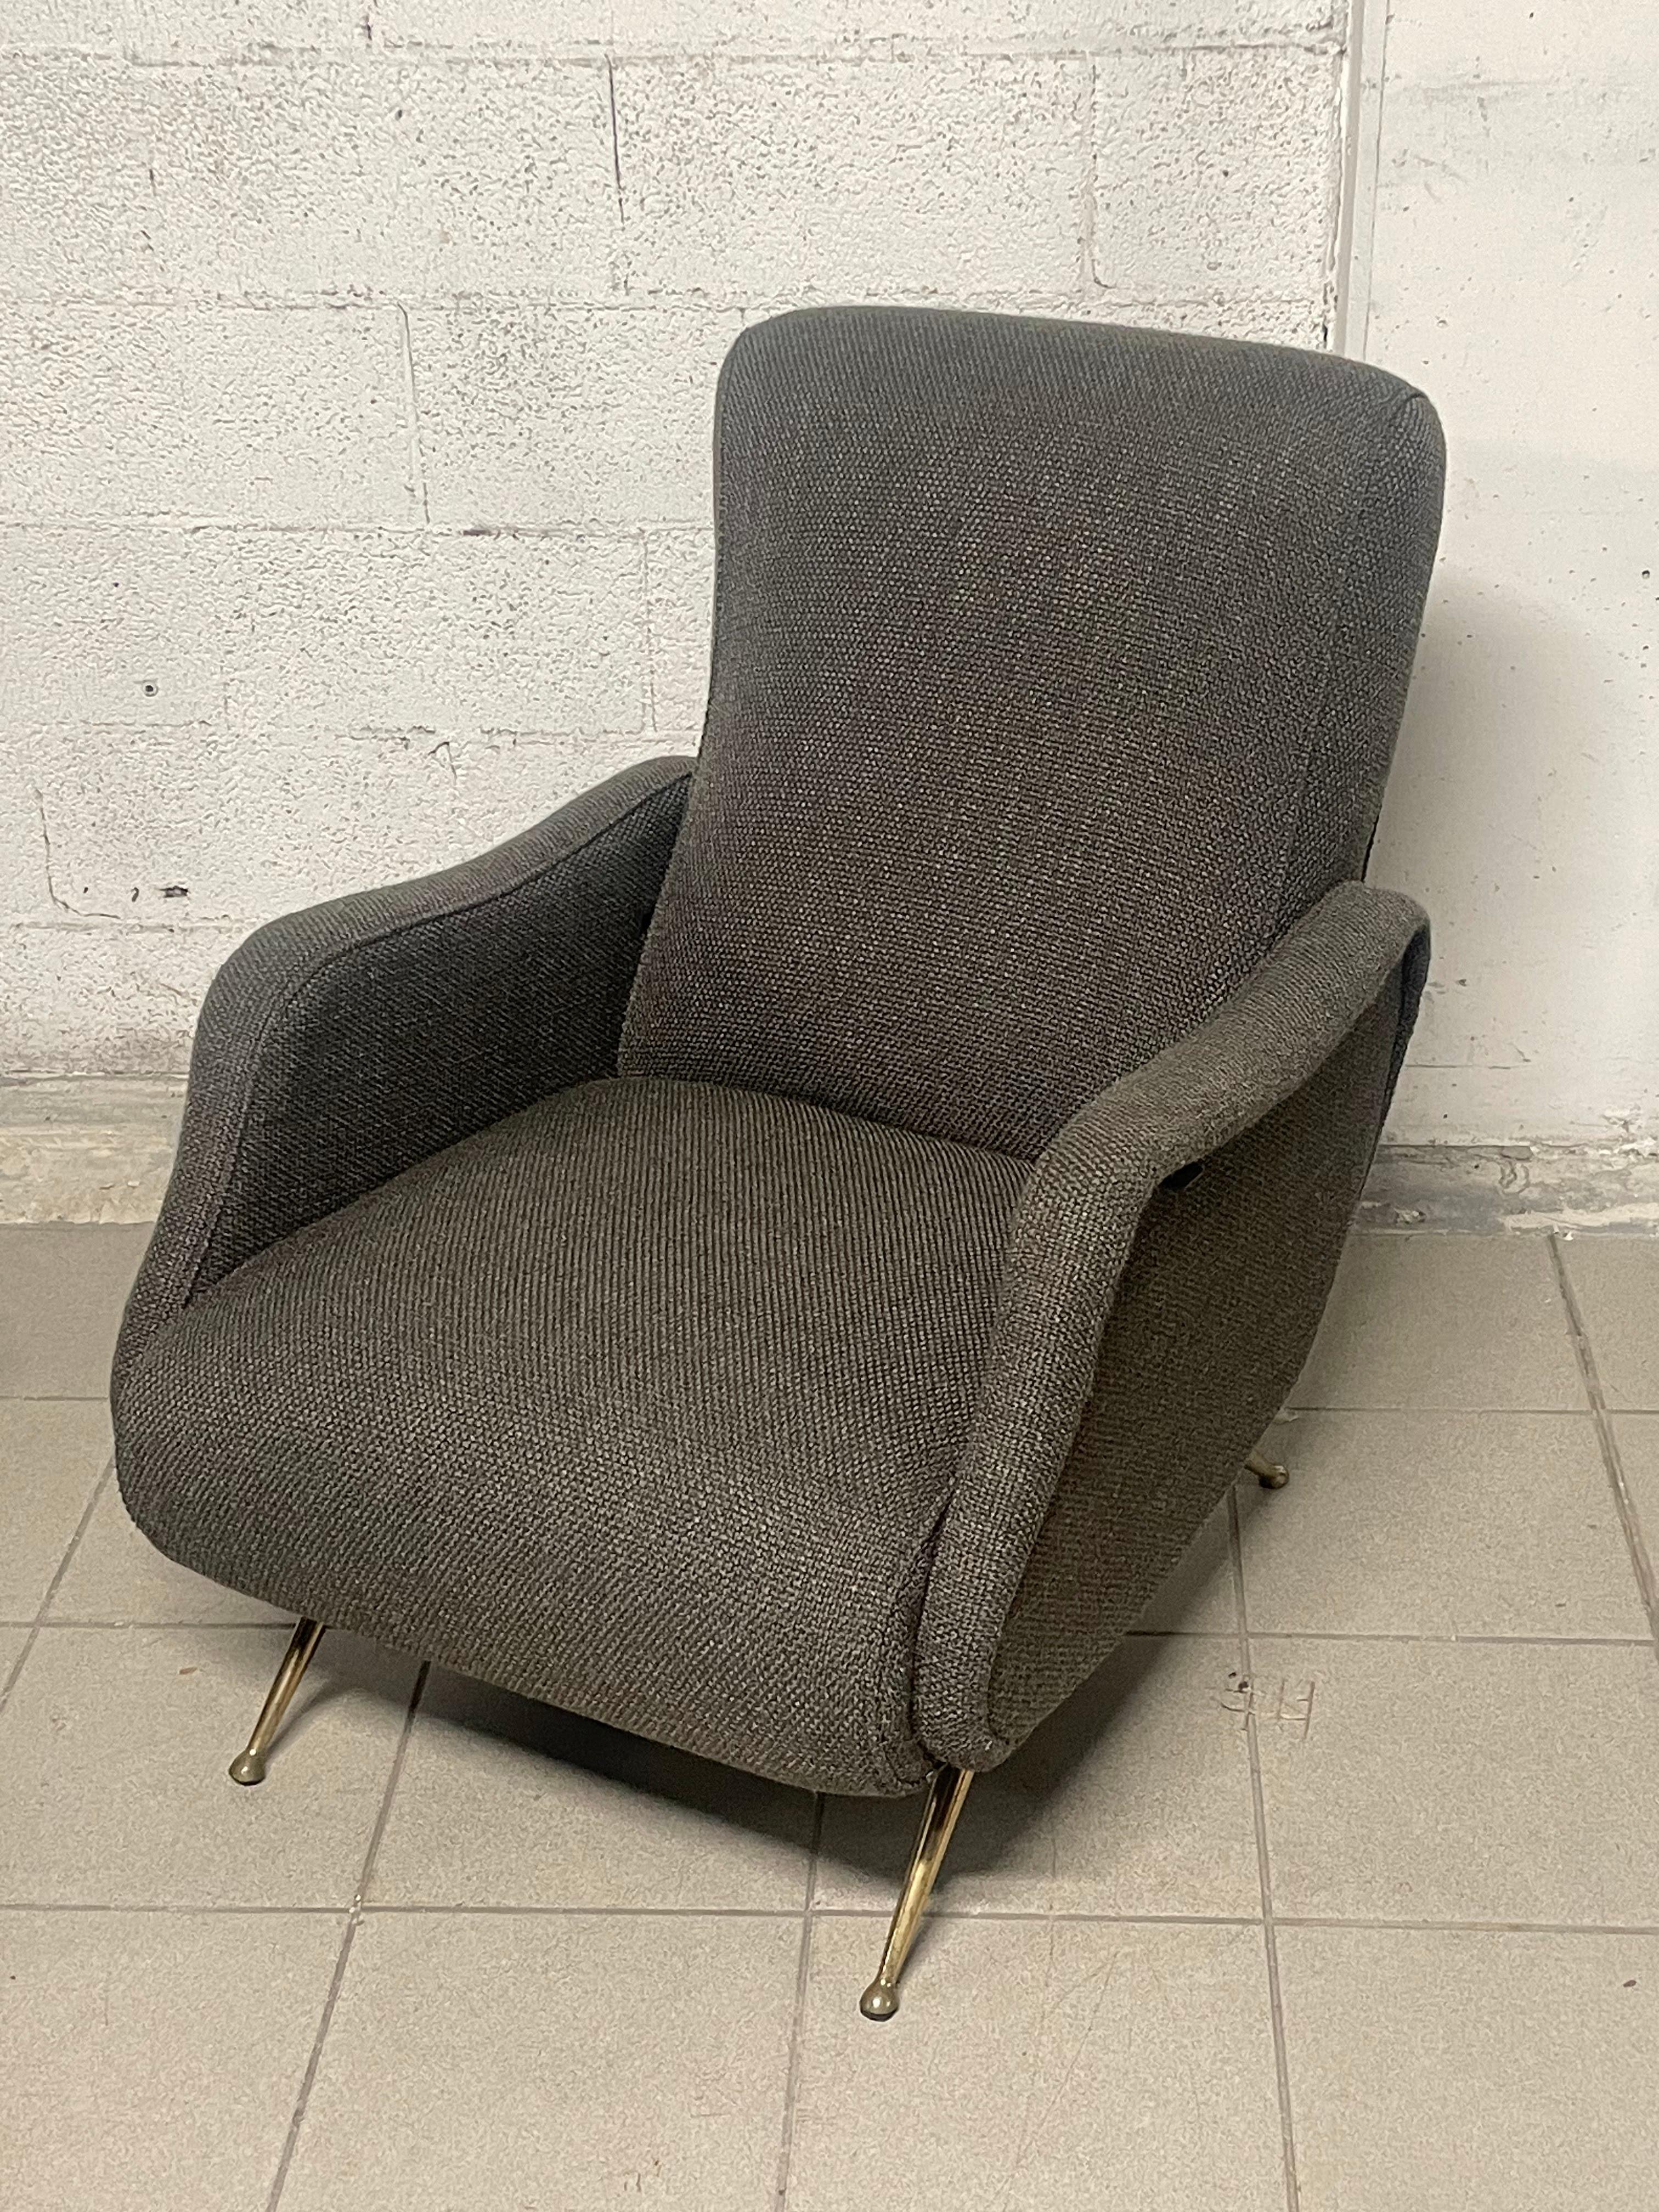 Pair of 1950s recliners For Sale 3